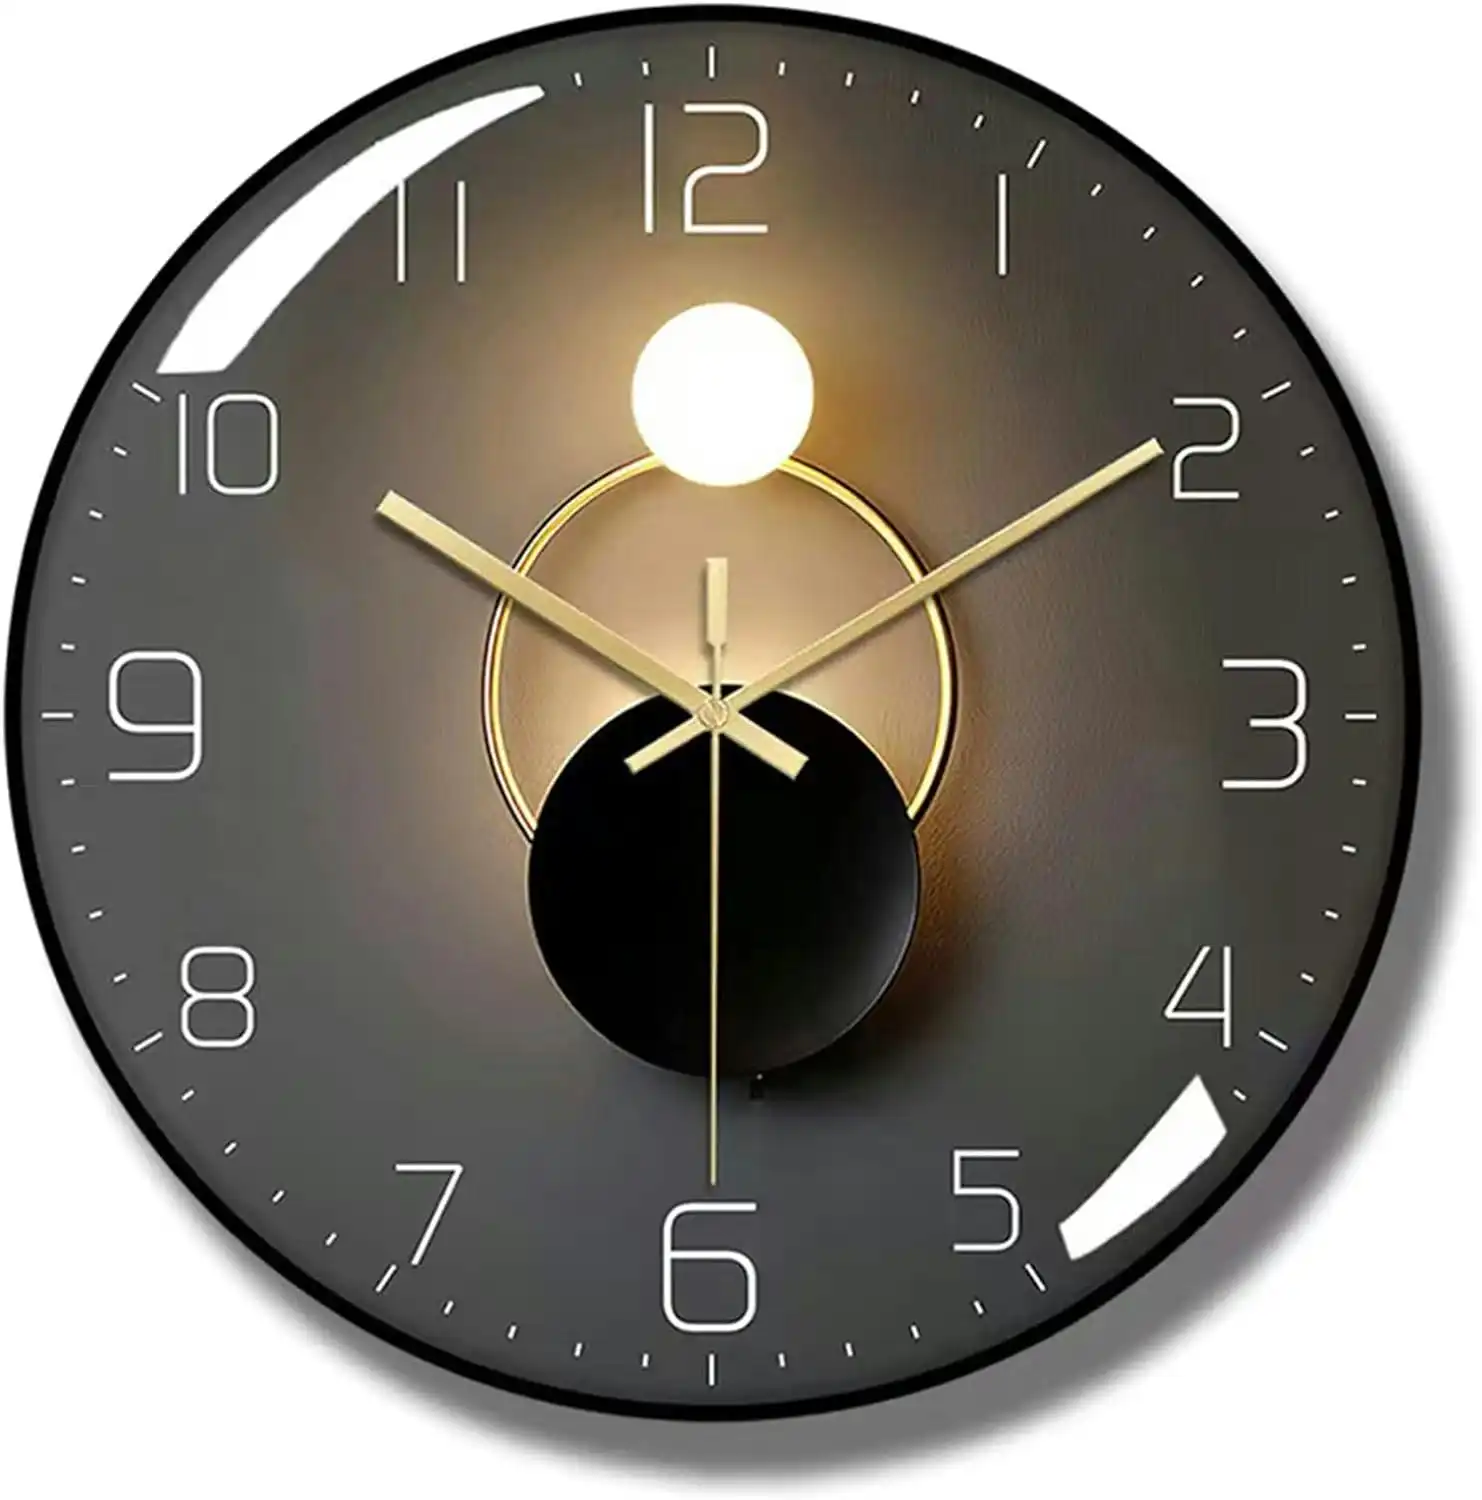 Wall Clock 3D Curved Glass, Silent Non-Ticking Battery Operated Decor